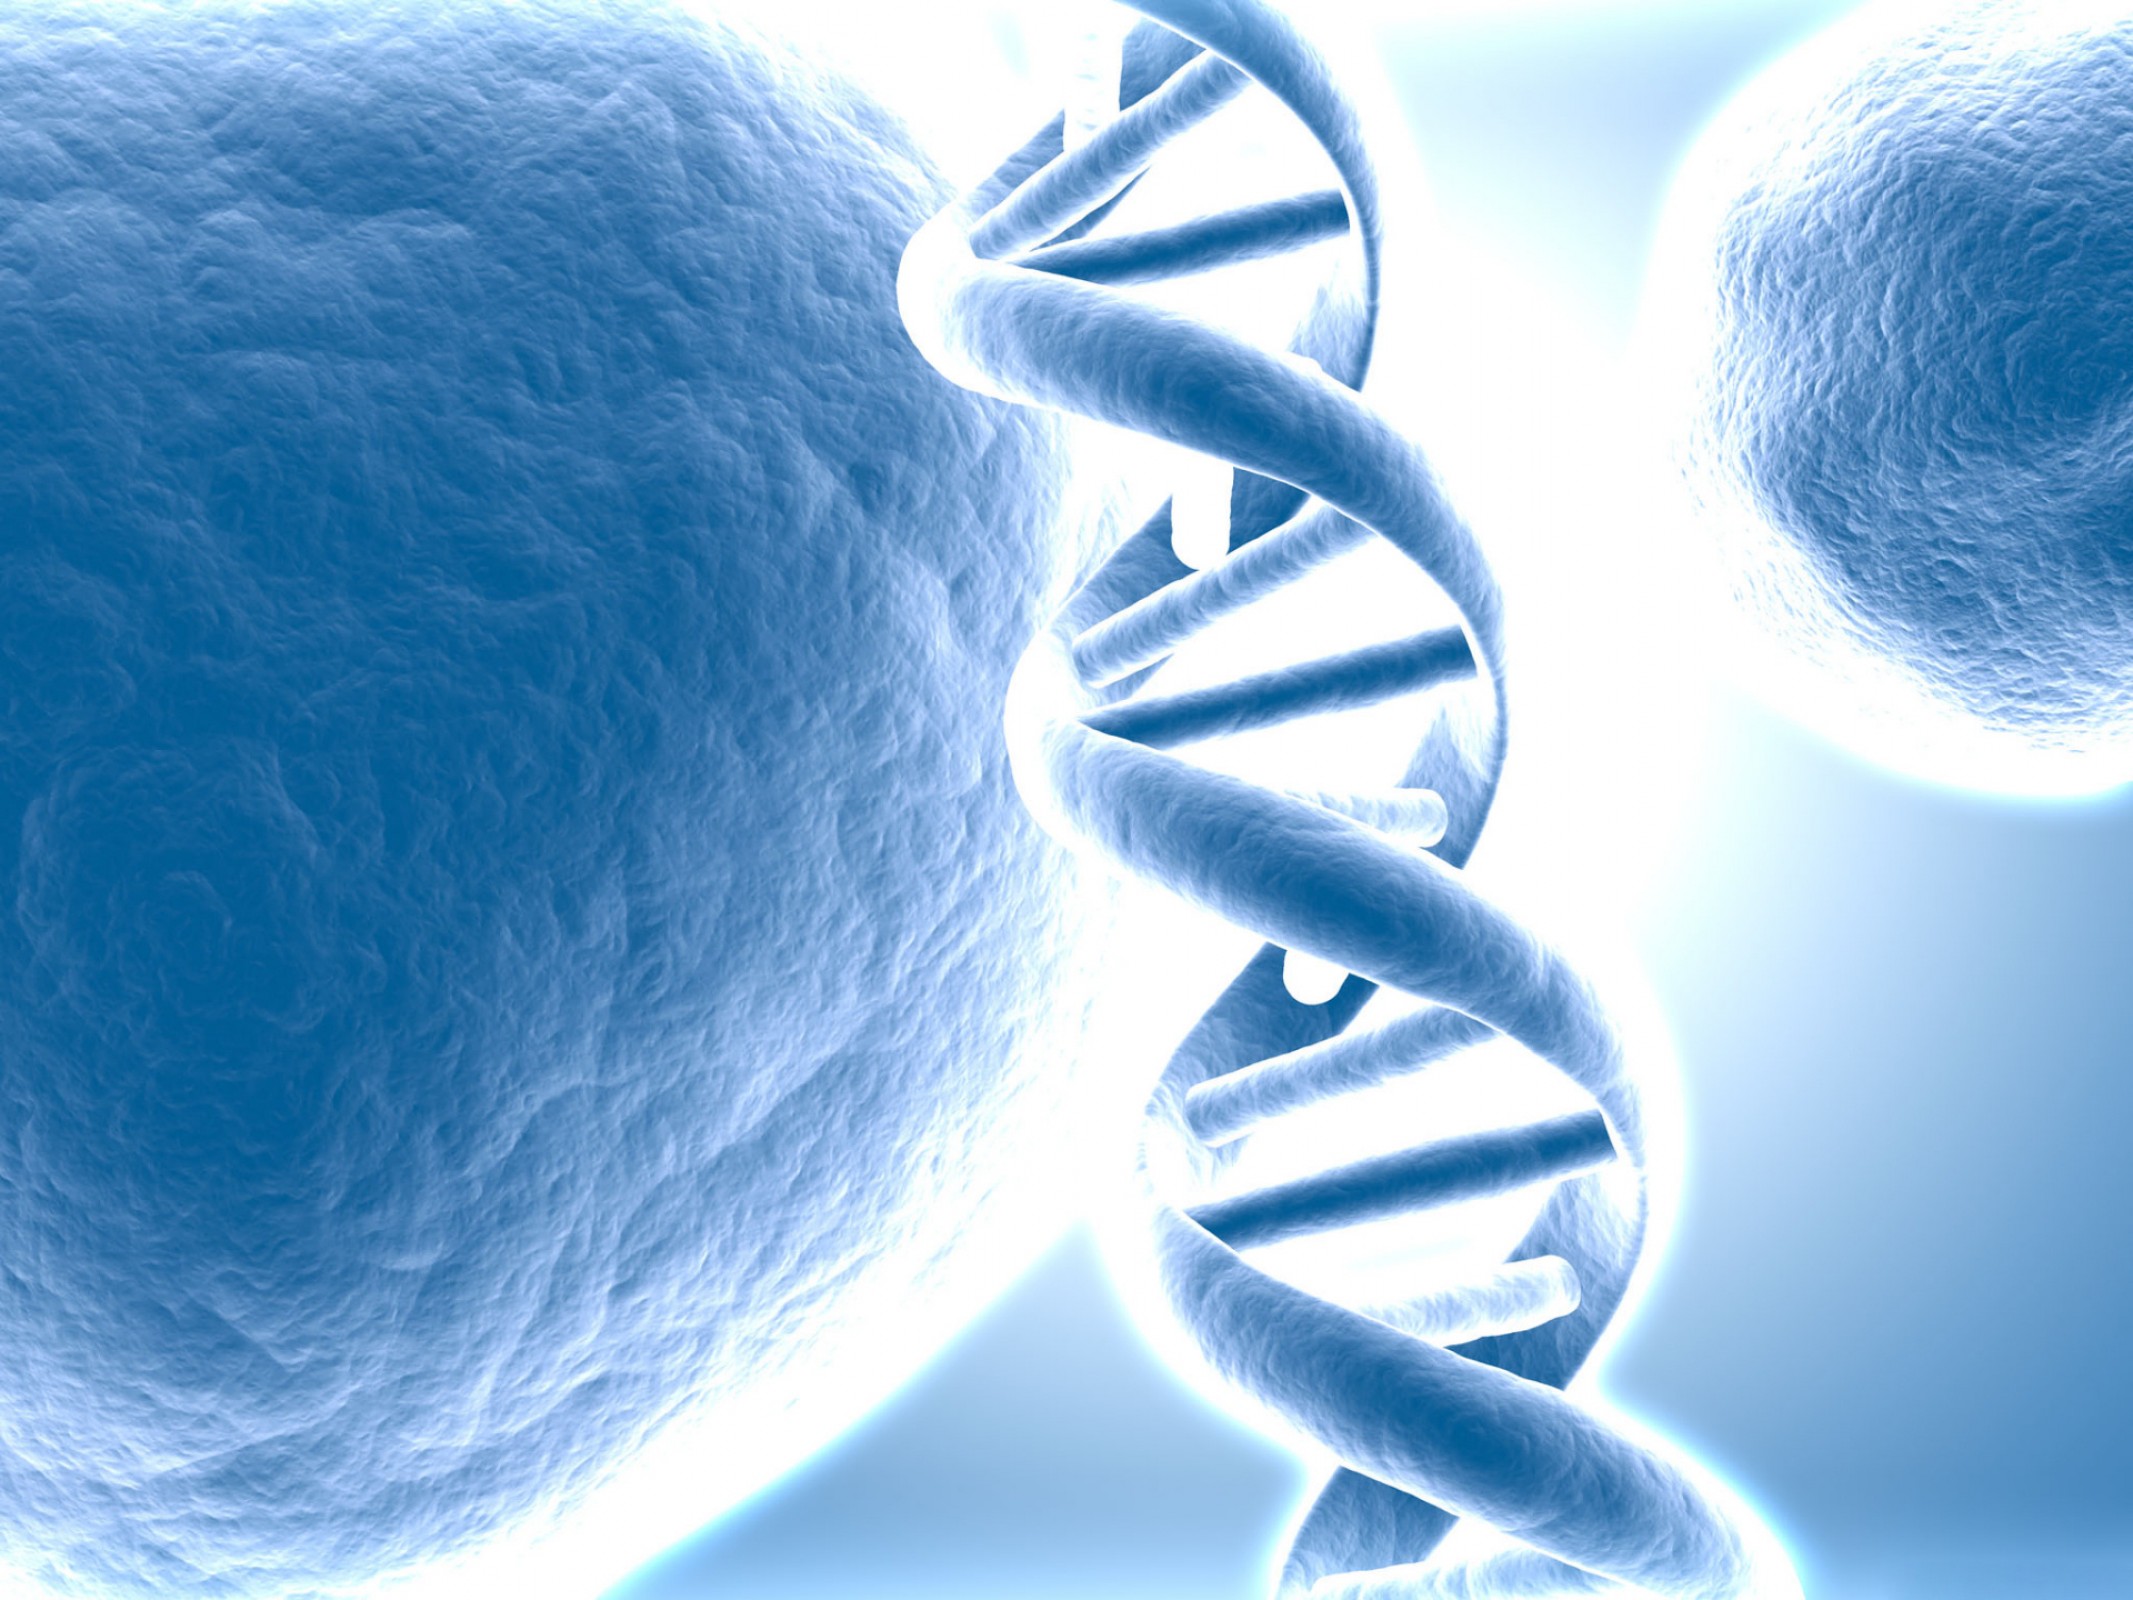 dna_represented_tridimensional_resized_2560x1600-w